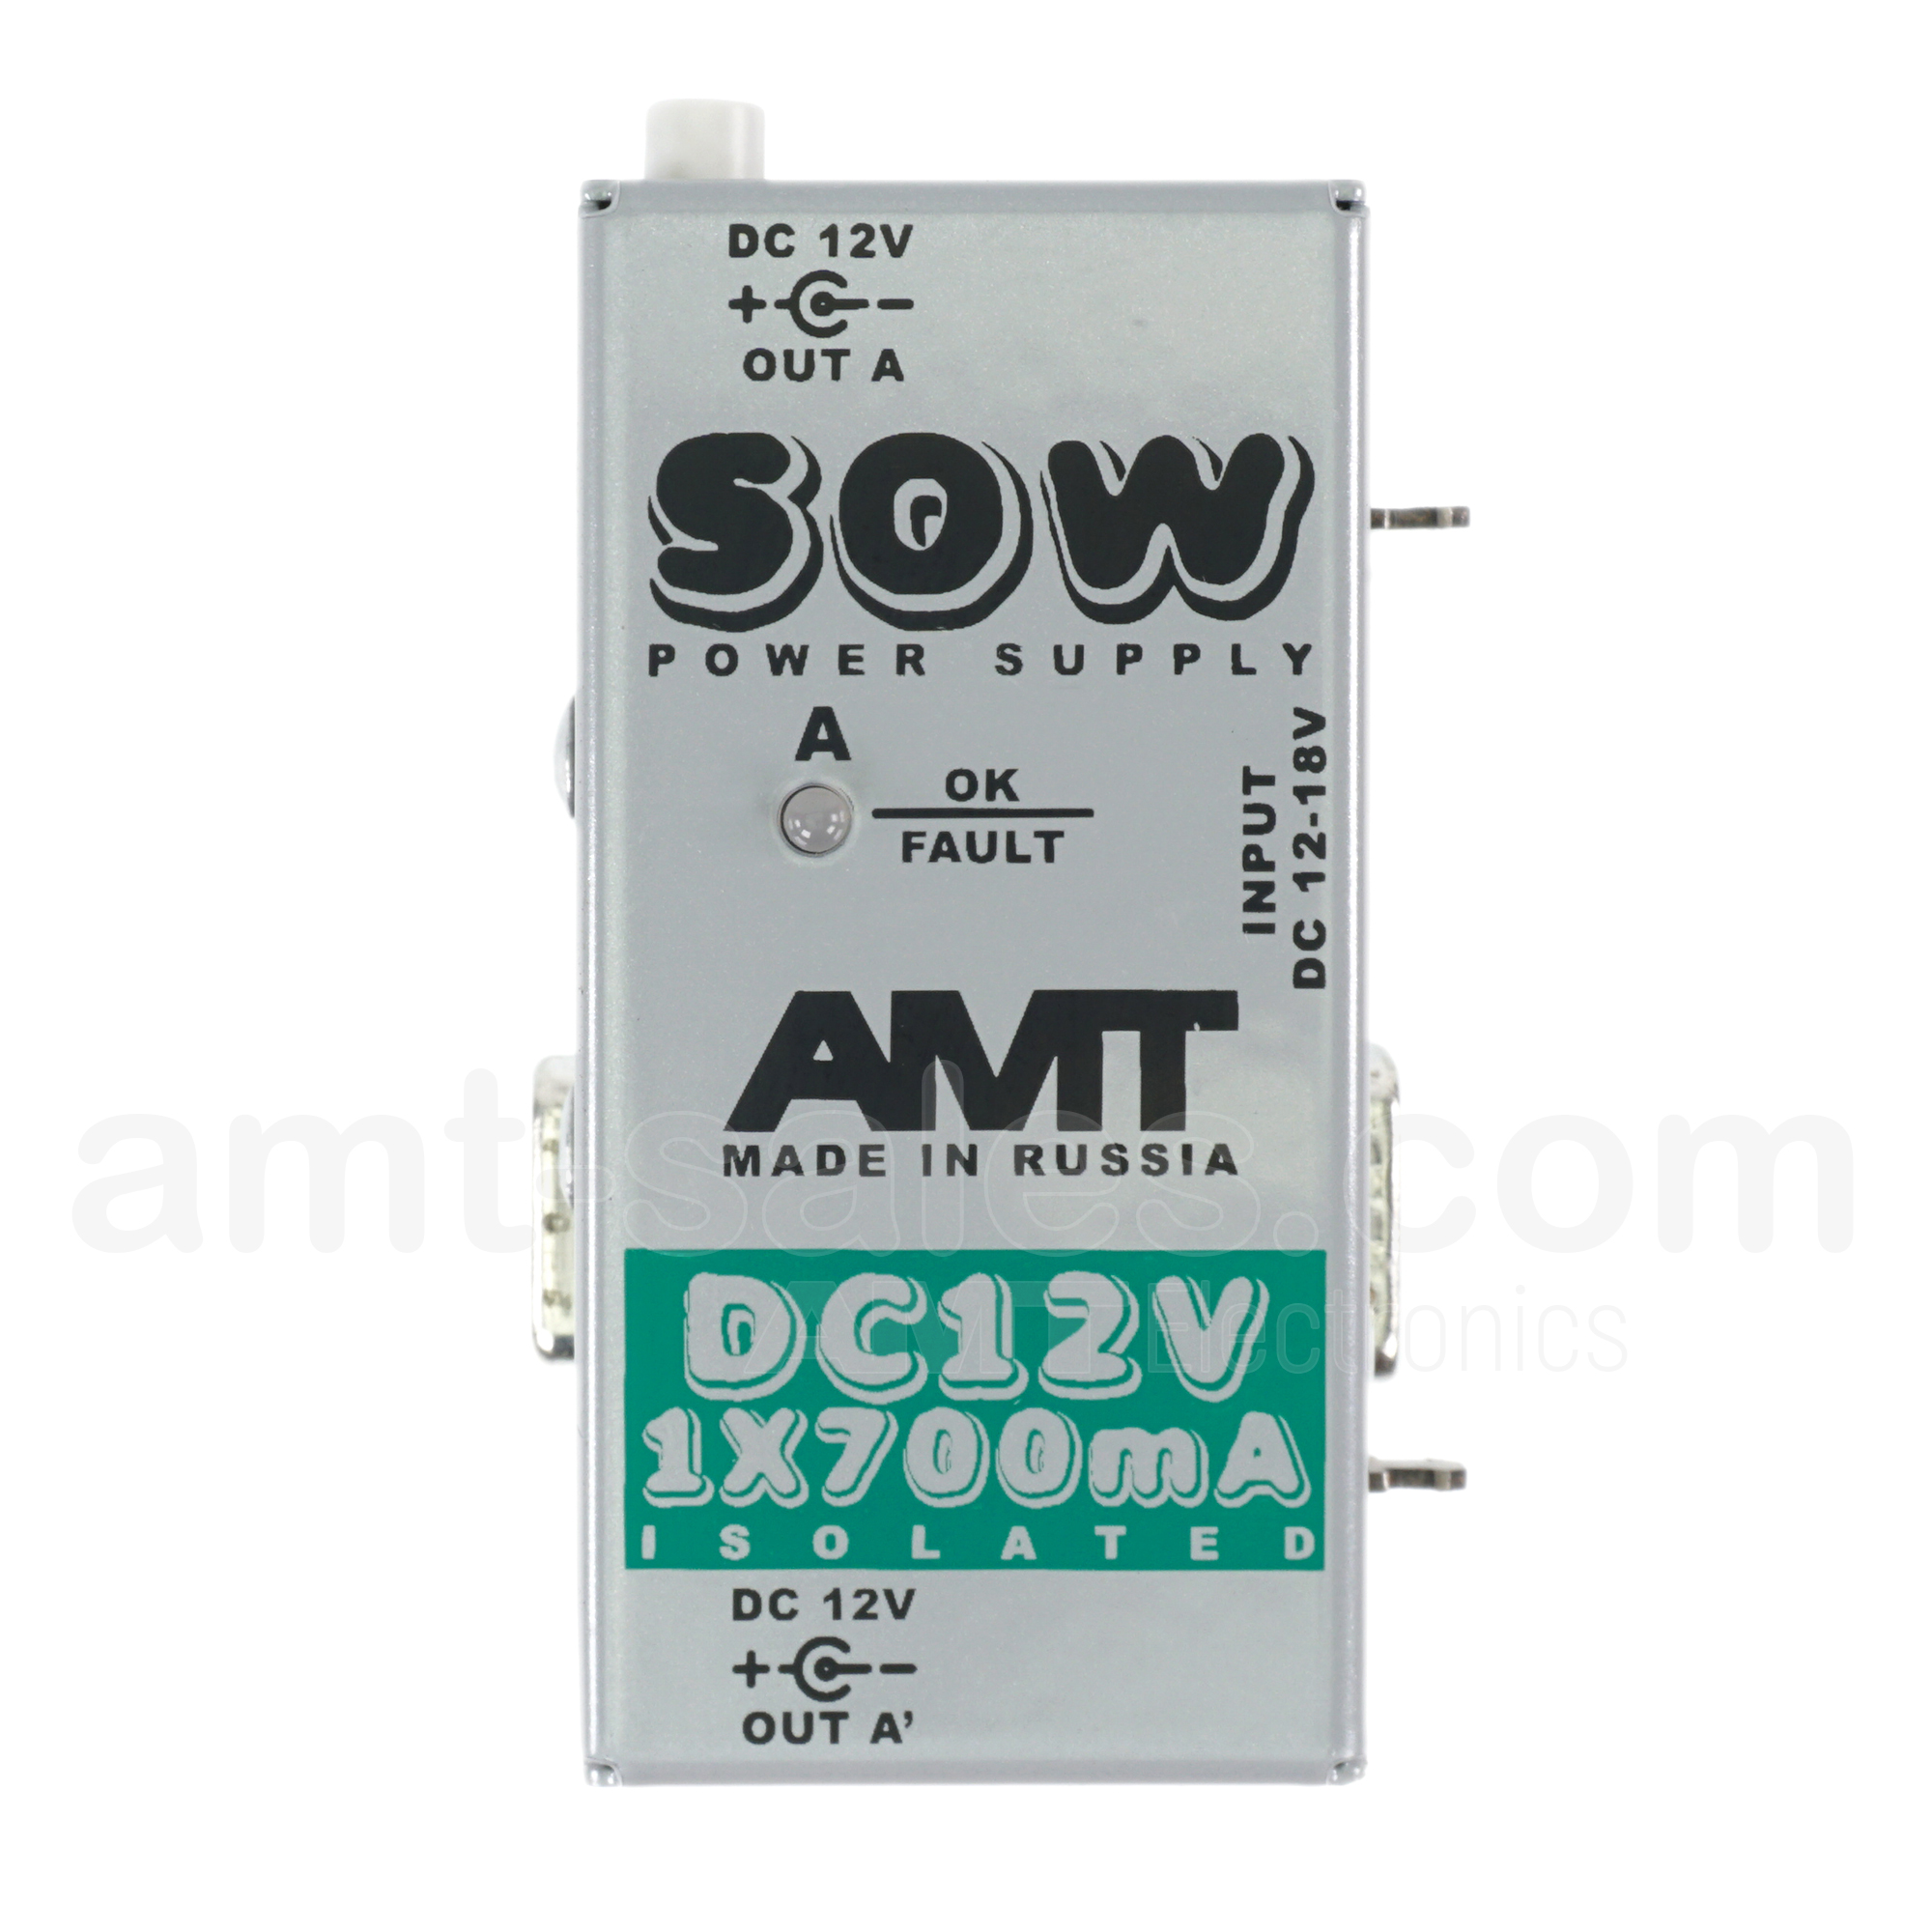 AMT SOW PS DC-12V 1x700mA - power supply module